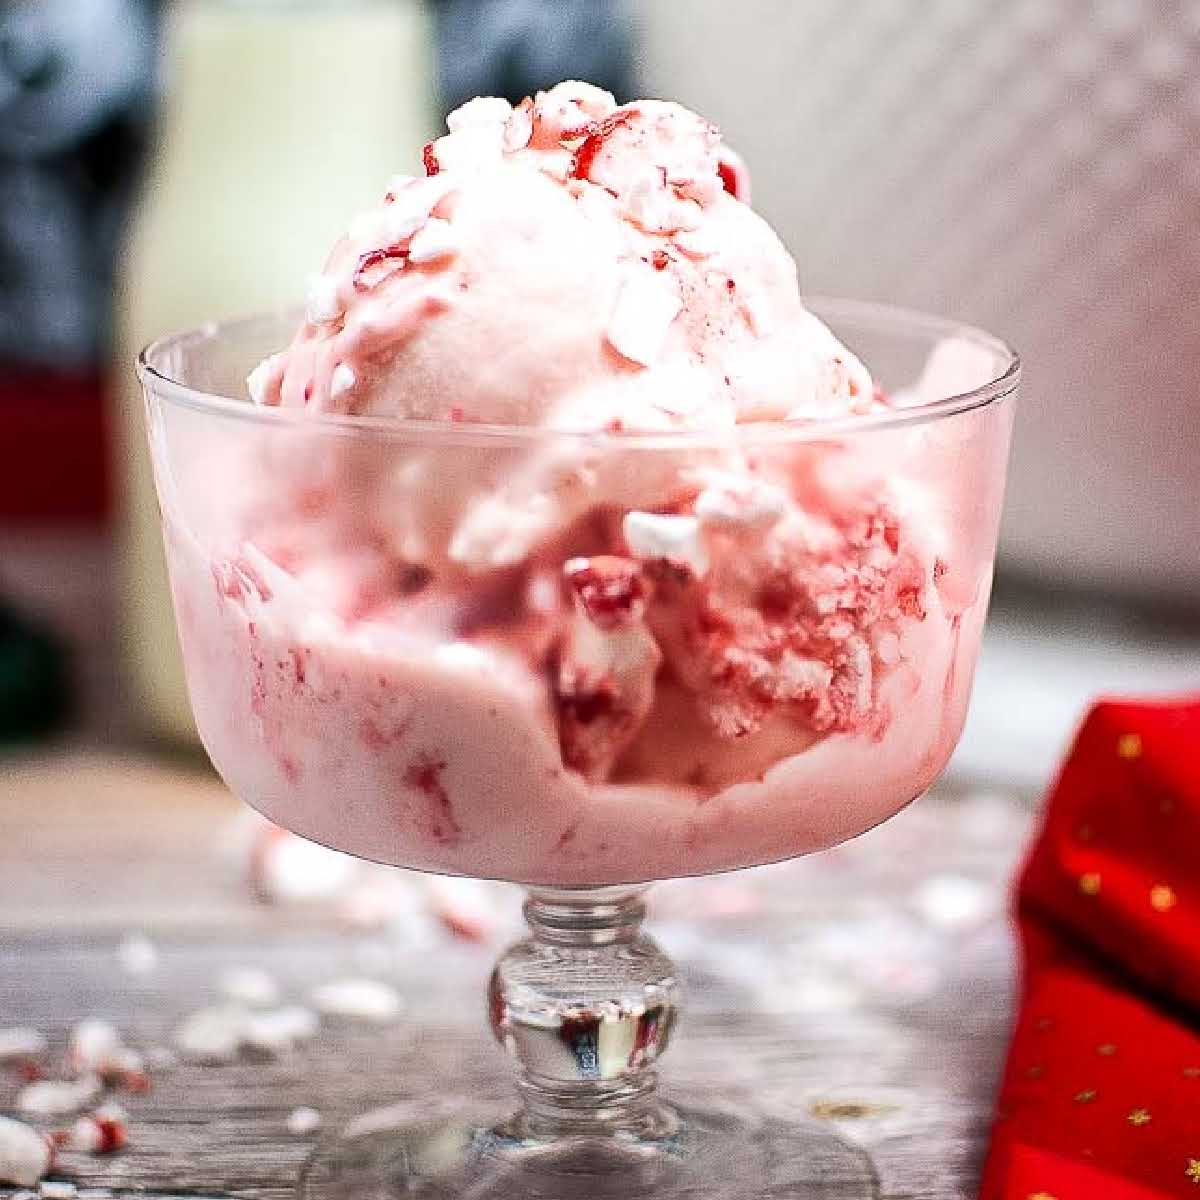 No churn peppermint ice cream in a small glass dish.